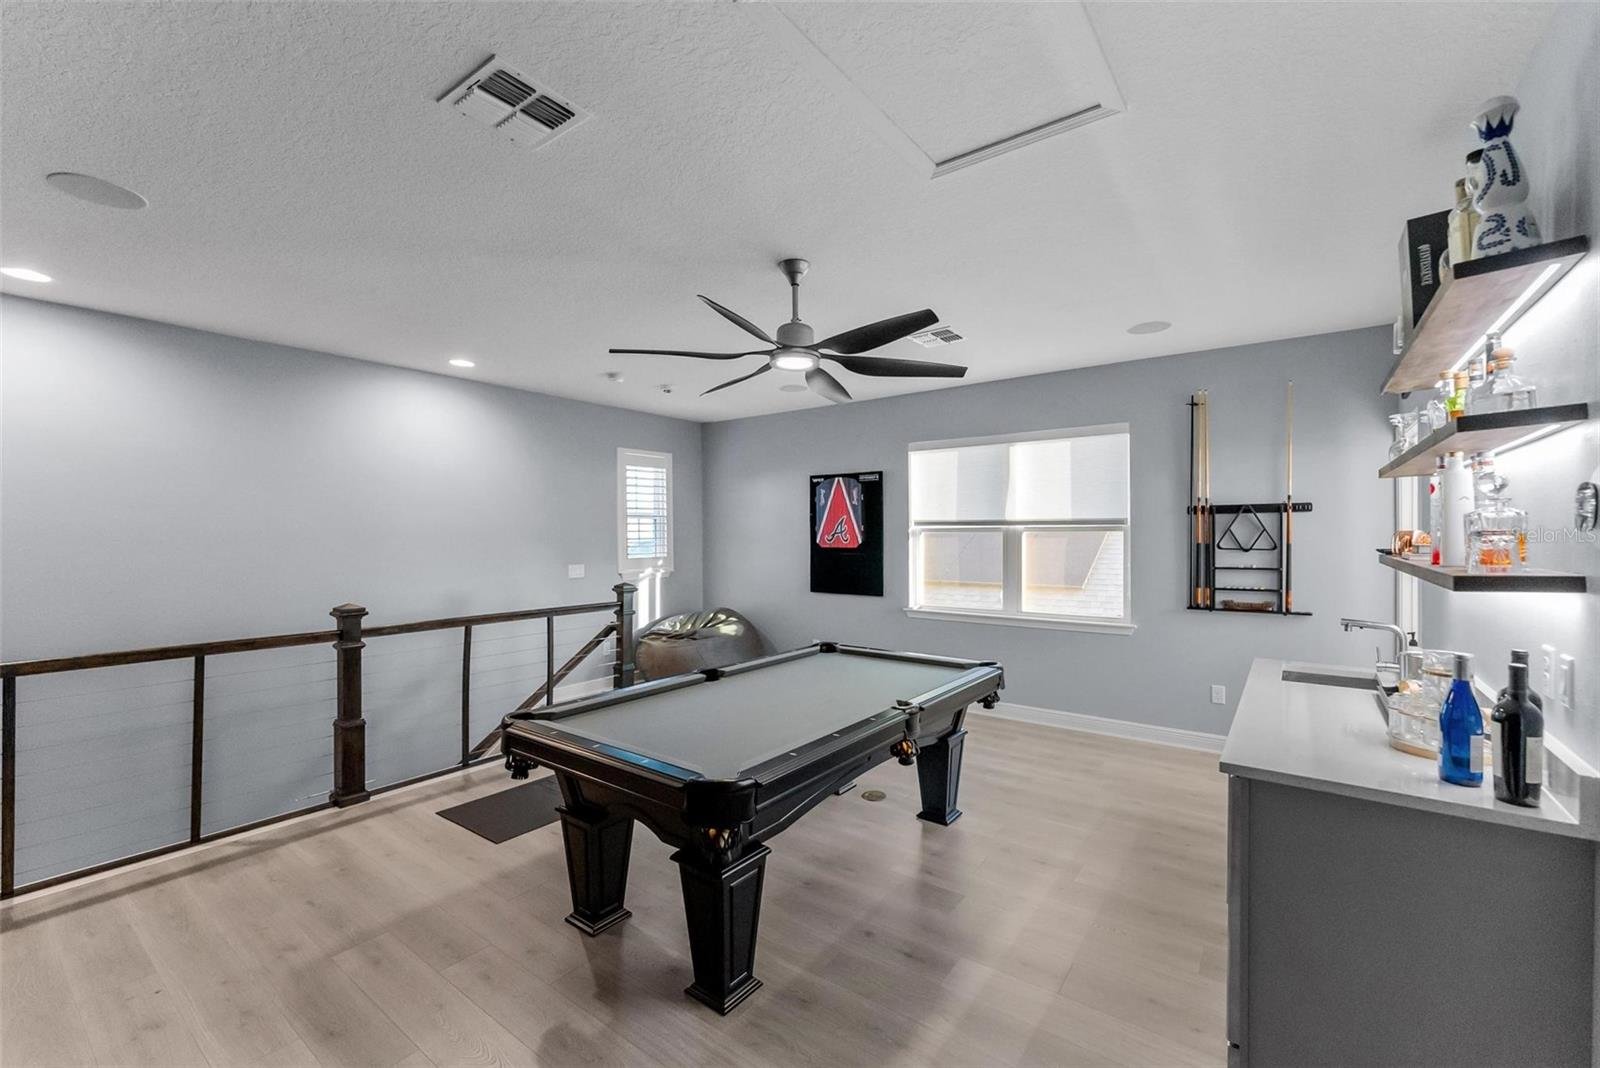 upstairs loft with pool table and wood flooring